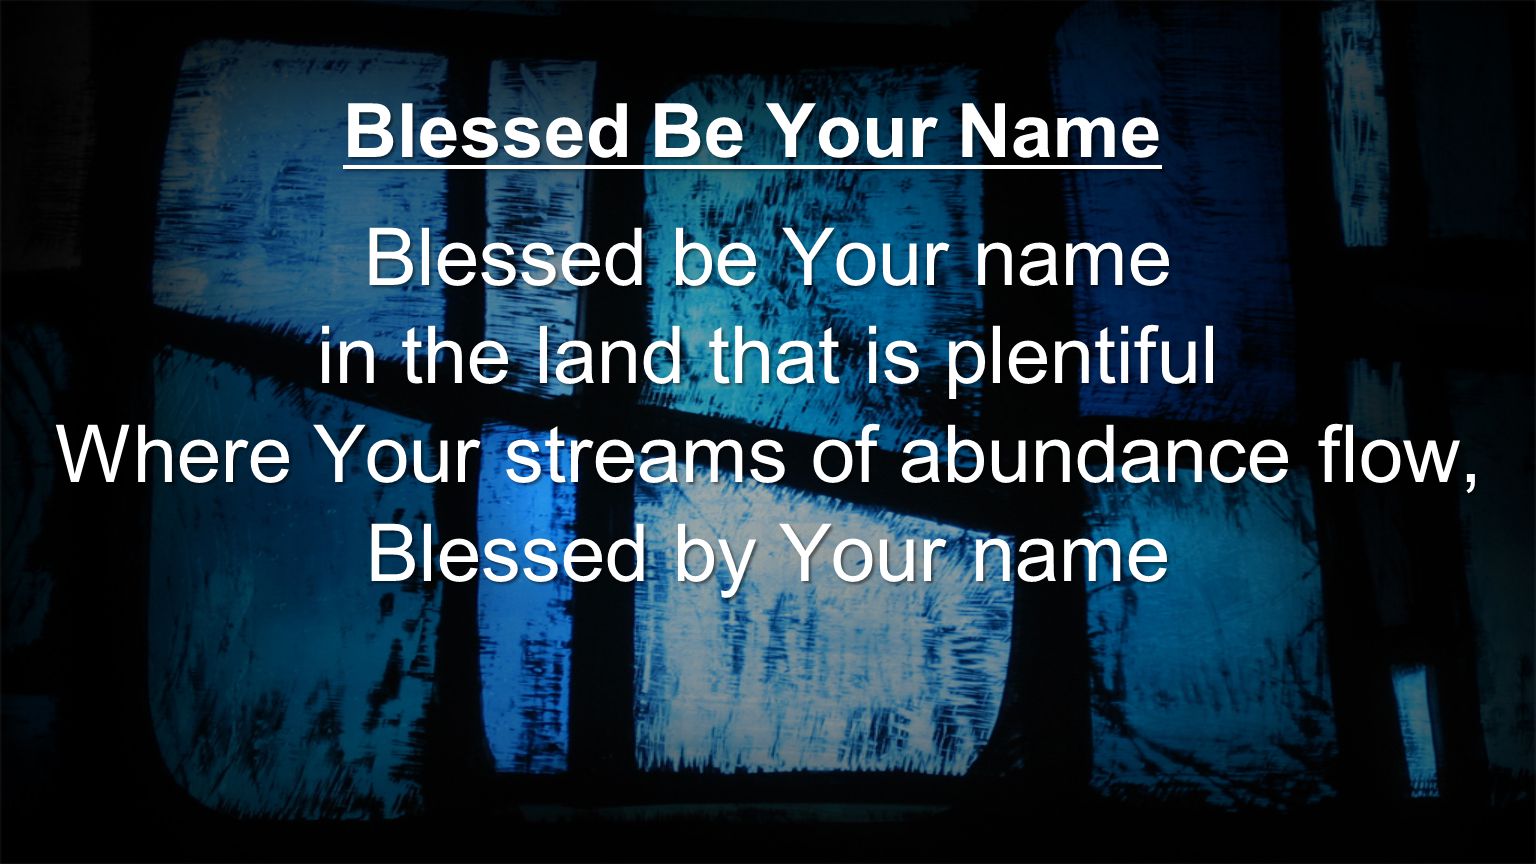 in the land that is plentiful Where Your streams of abundance flow,